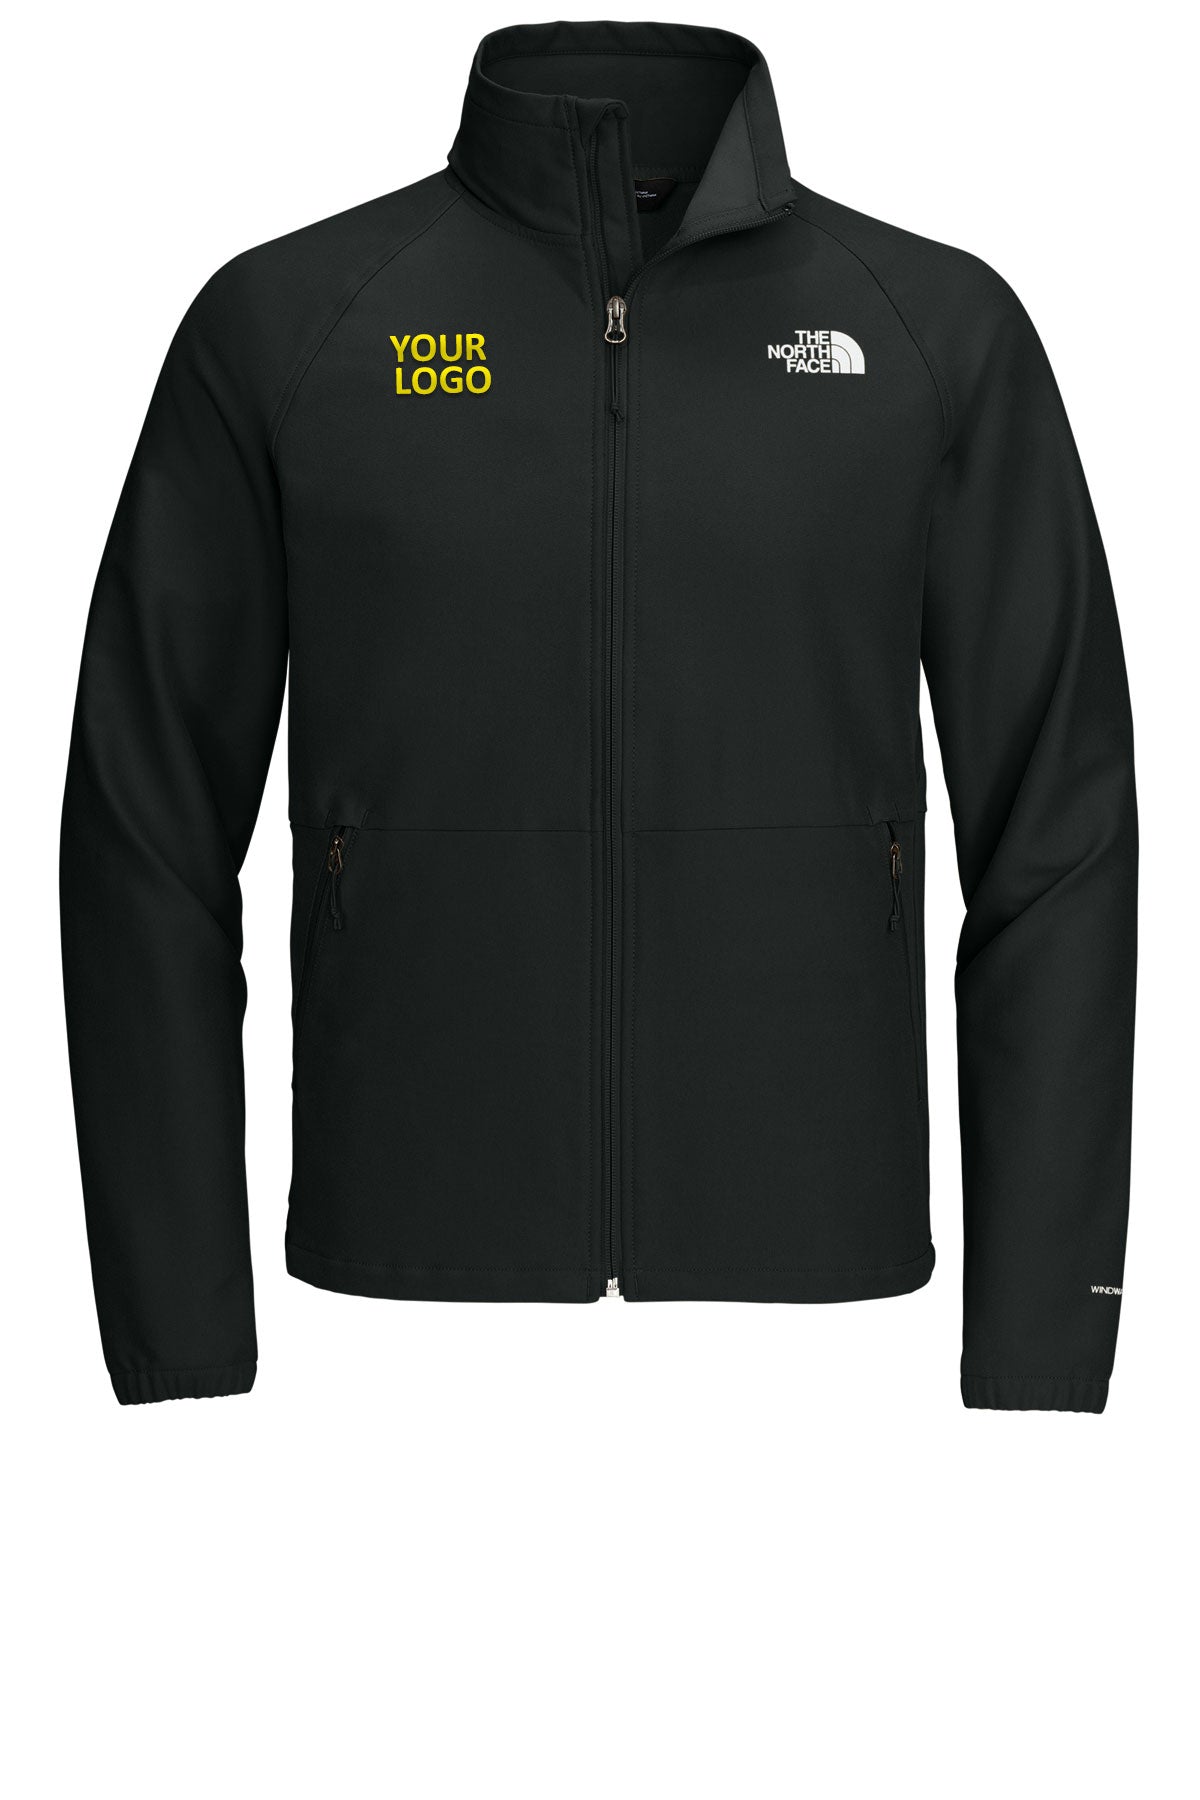 The North Face TNF Black Heather NF0A8BUD jackets with company logo